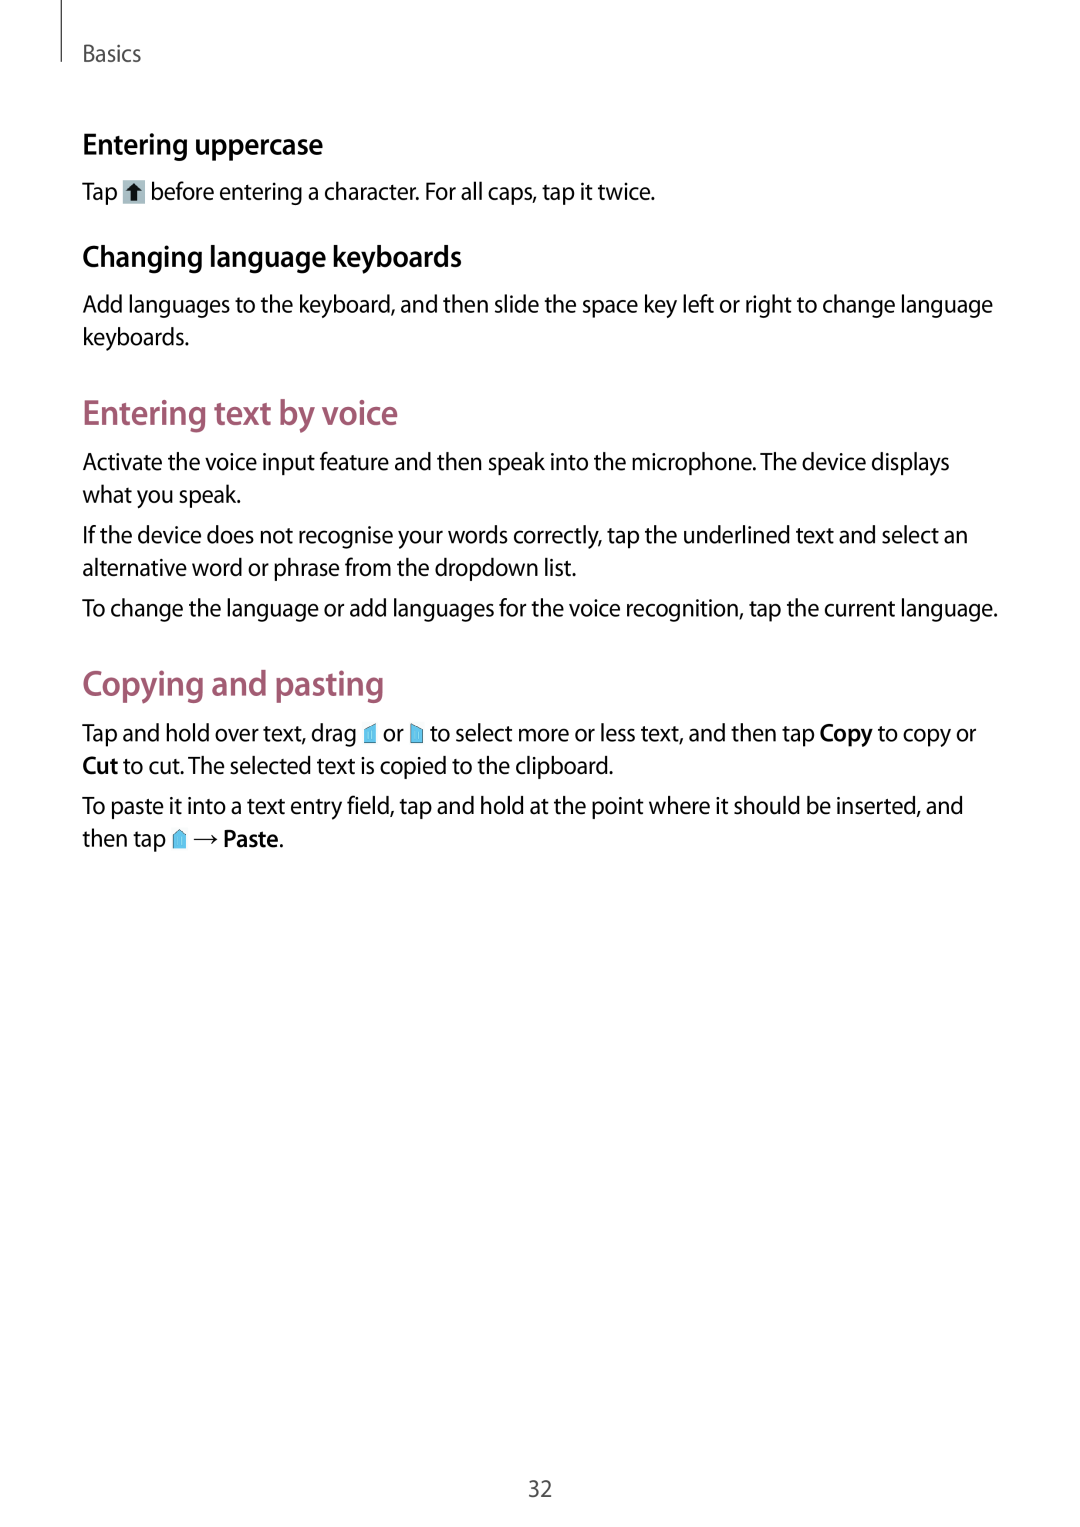 Samsung GT-I9195ZWIXEF manual Entering text by voice, Copying and pasting, Entering uppercase, Changing language keyboards 